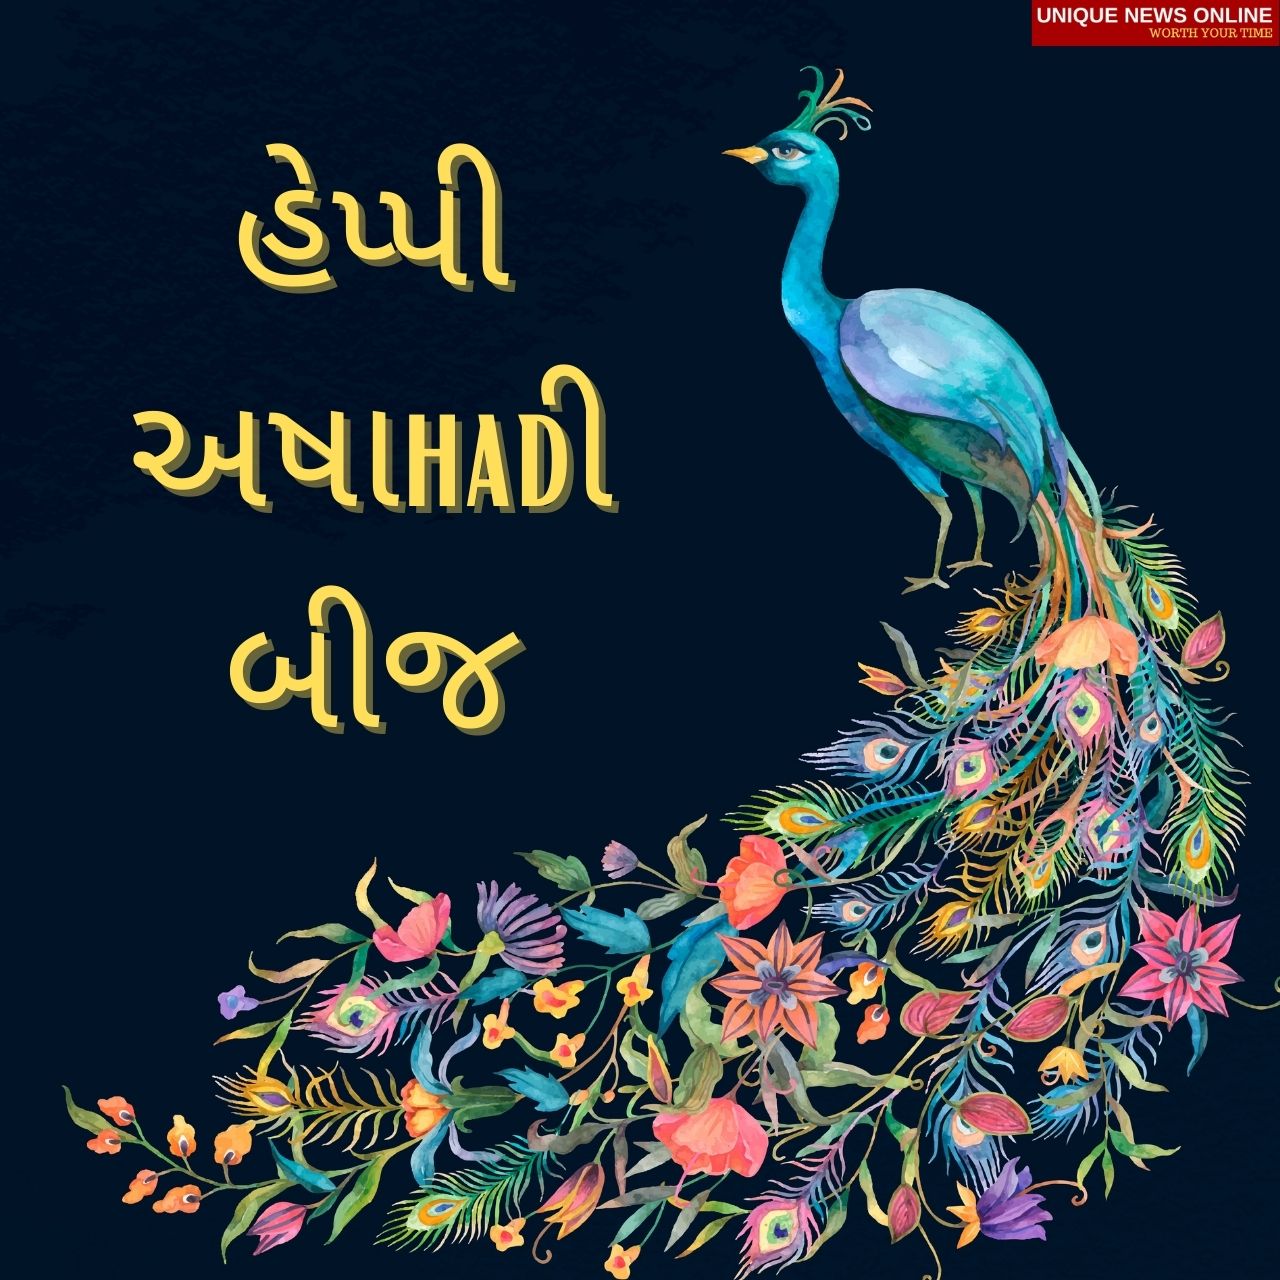 Ashadhi Bij 2021 Gujarati and Kutchi Wishes, Quotes, Greetings, GIF, Messages, Status, Greetings, and HD Images to Share on Kutchi New Year